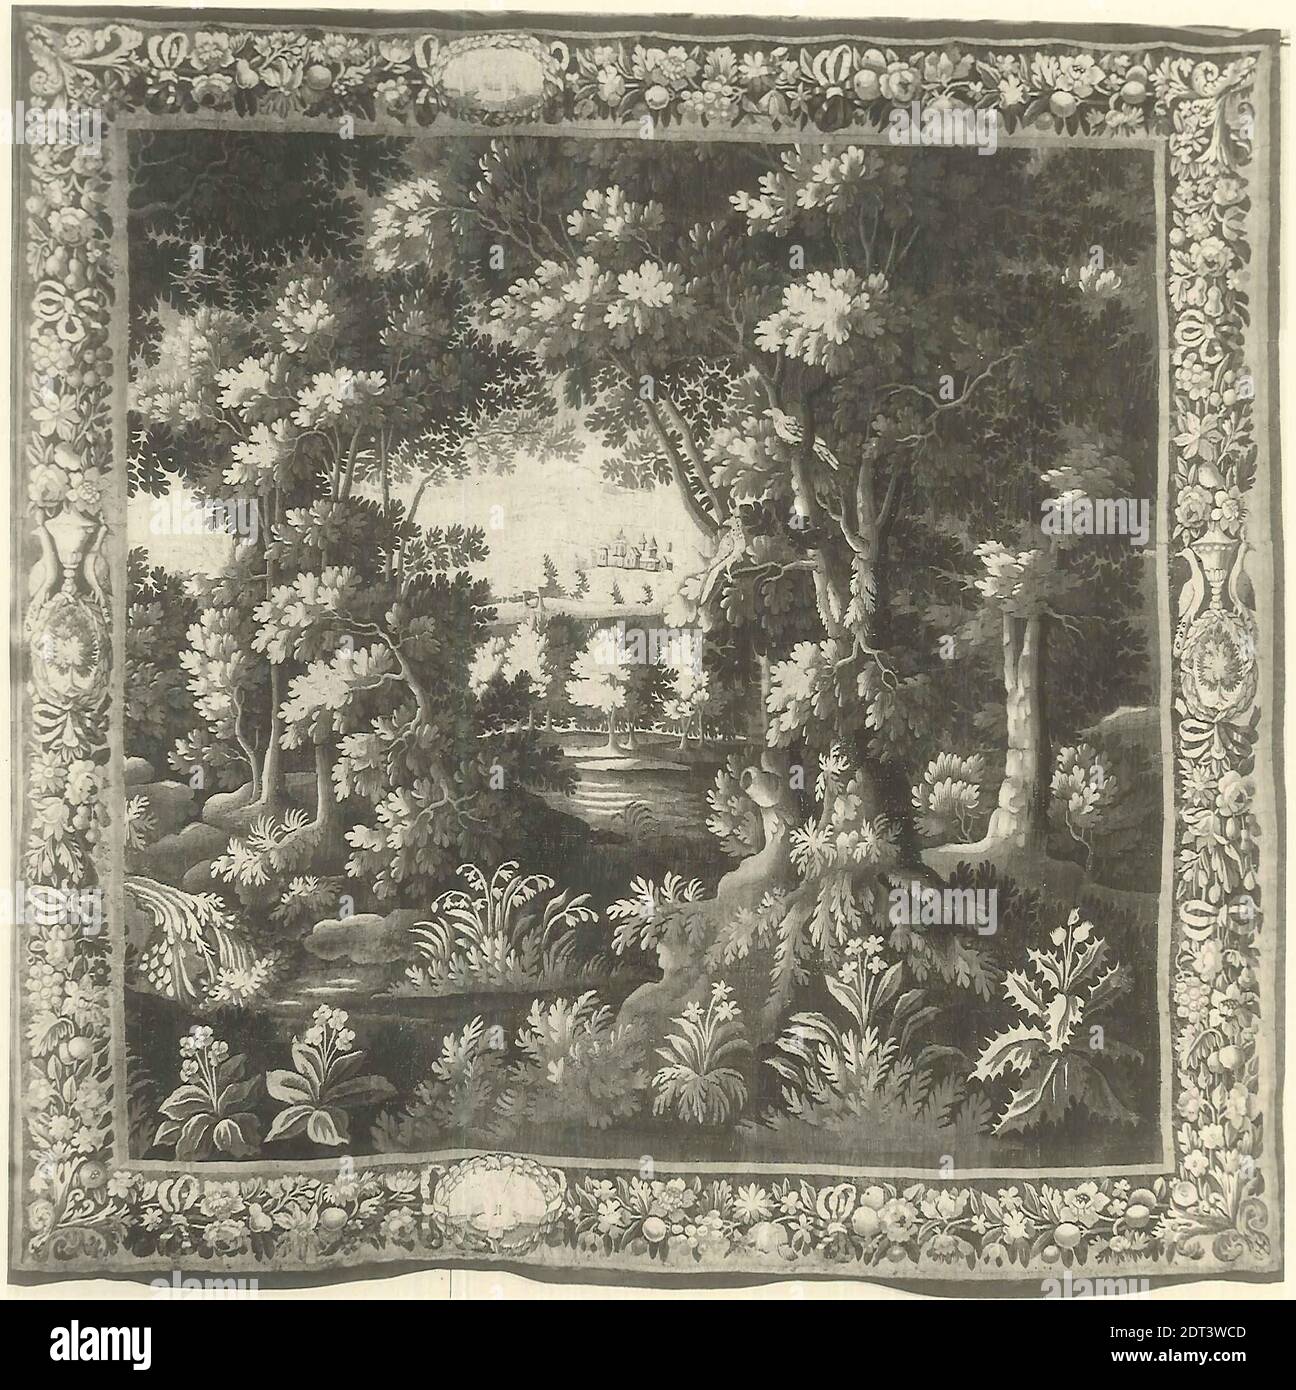 Maker: Unknown, Verdure tapestry, early 18th century, Wool and silk, 268 × 276.9 cm (105 1/2 × 109 in.), French, Aubusson, 18th century, Textiles Stock Photo